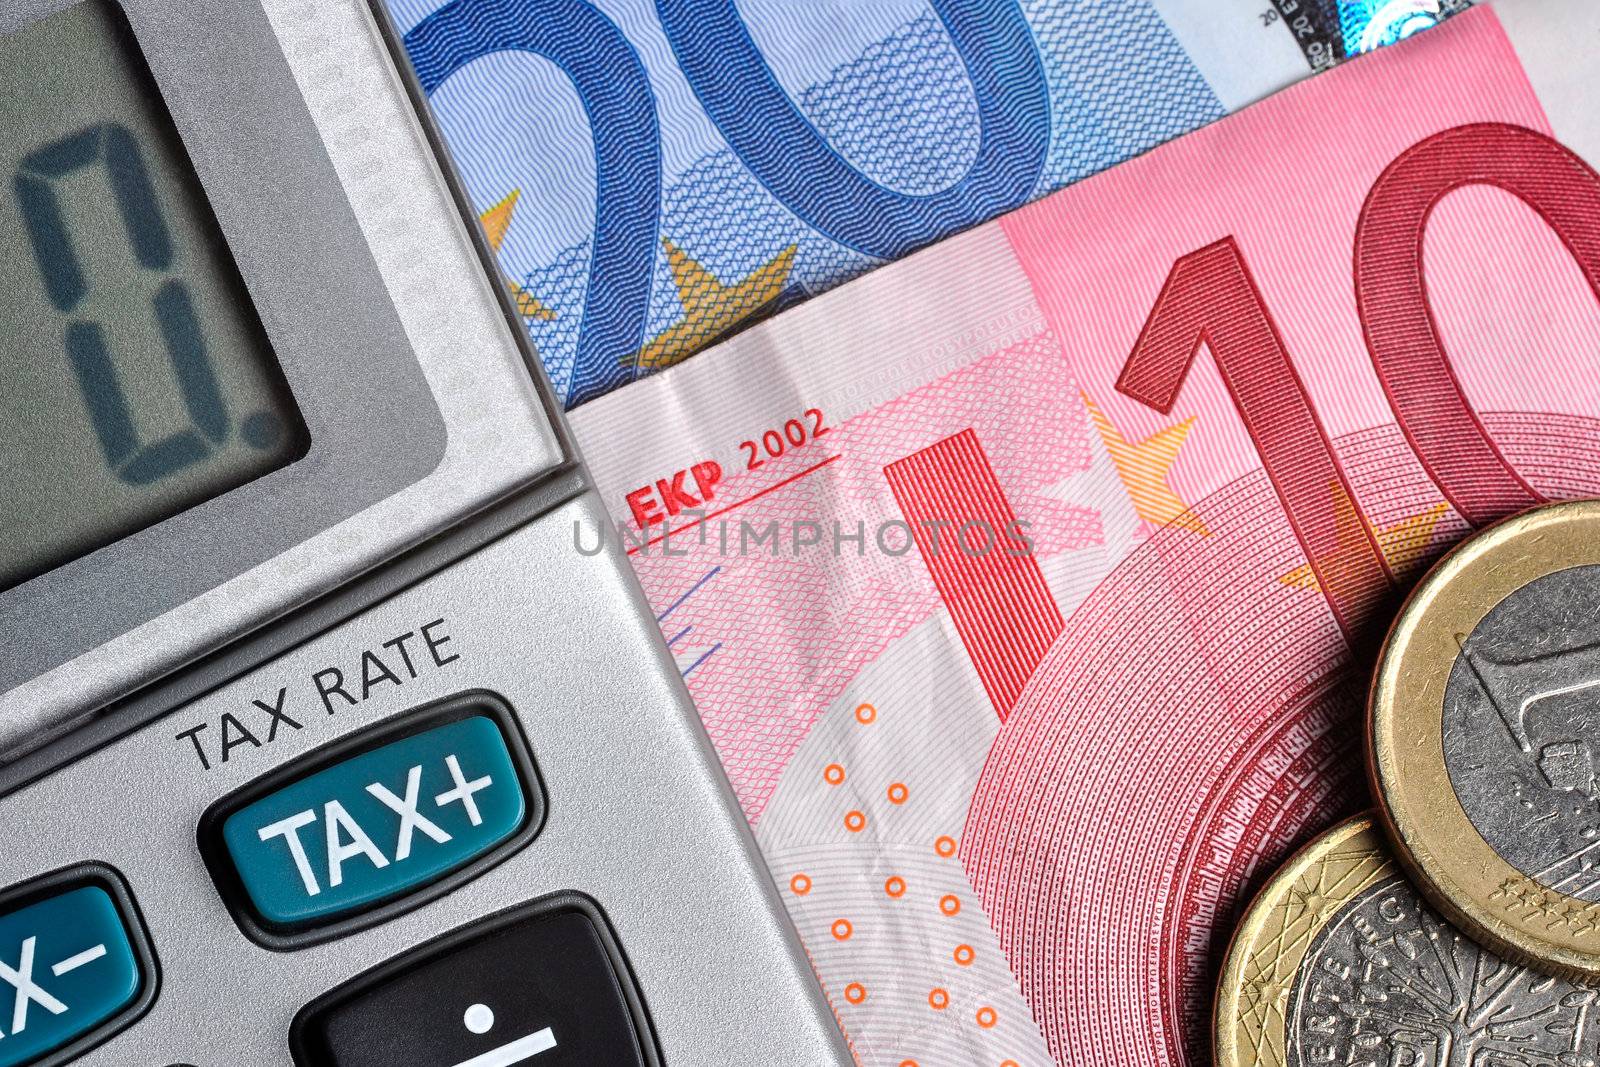 Detail of calculator, focusing the TAX key, next to some Euro bills and coins